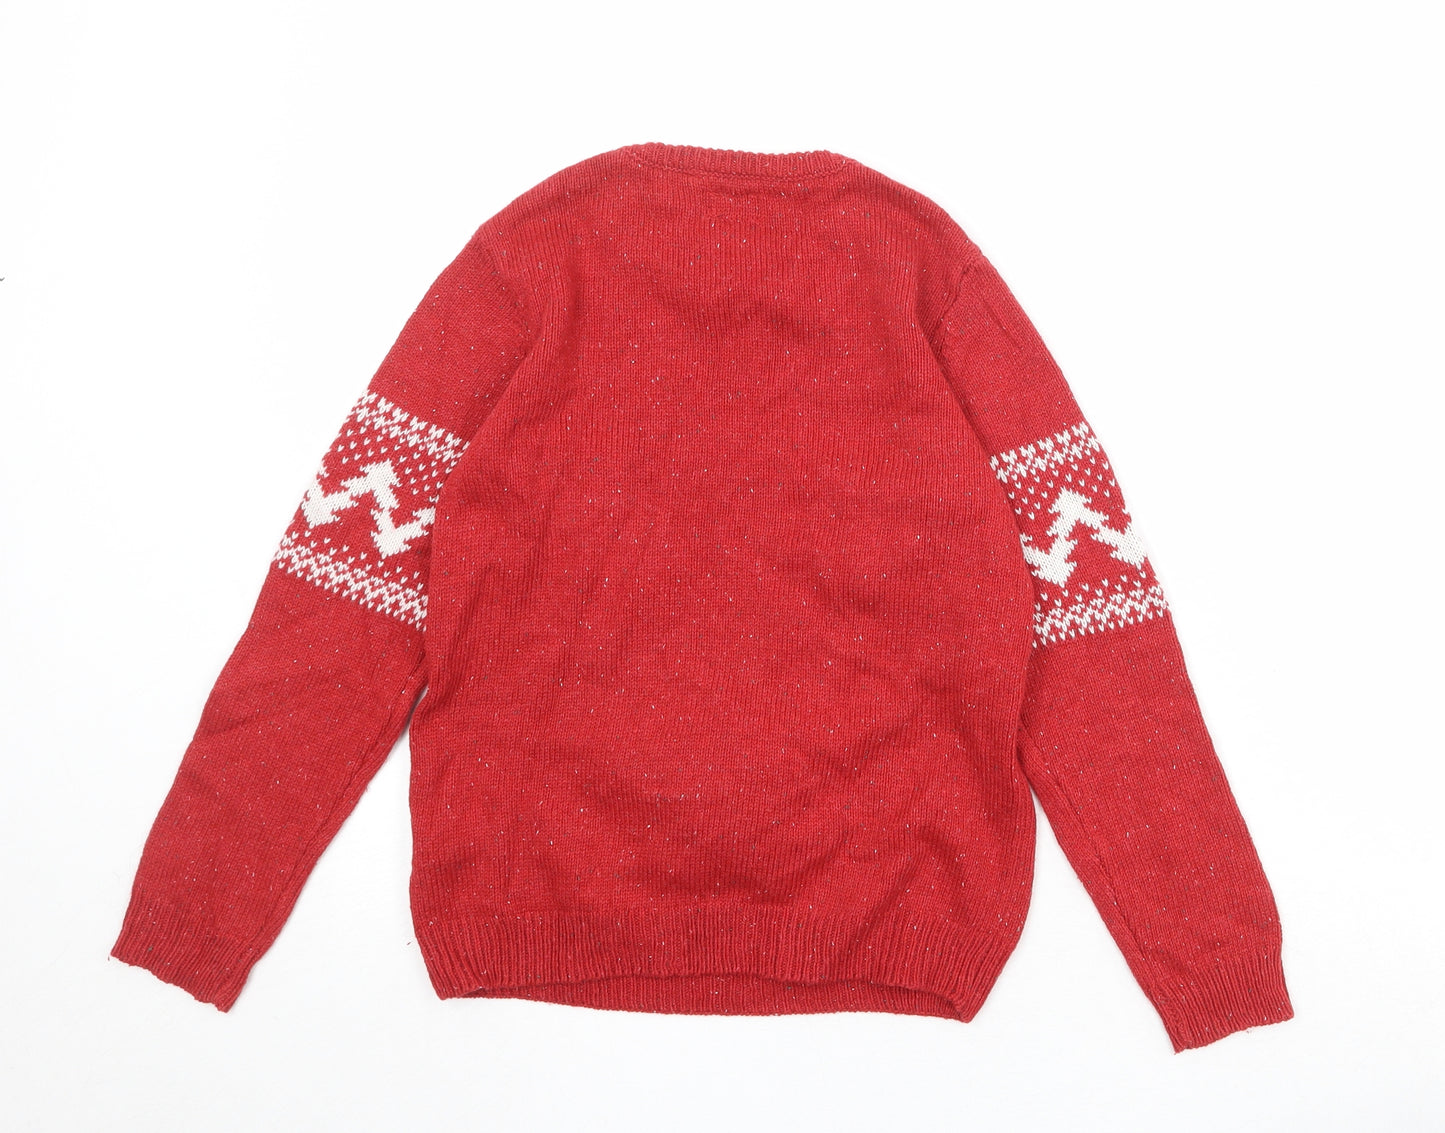 NEXT Boys Red Crew Neck Geometric Acrylic Pullover Jumper Size 10 Years Pullover - Christmas Reindeer